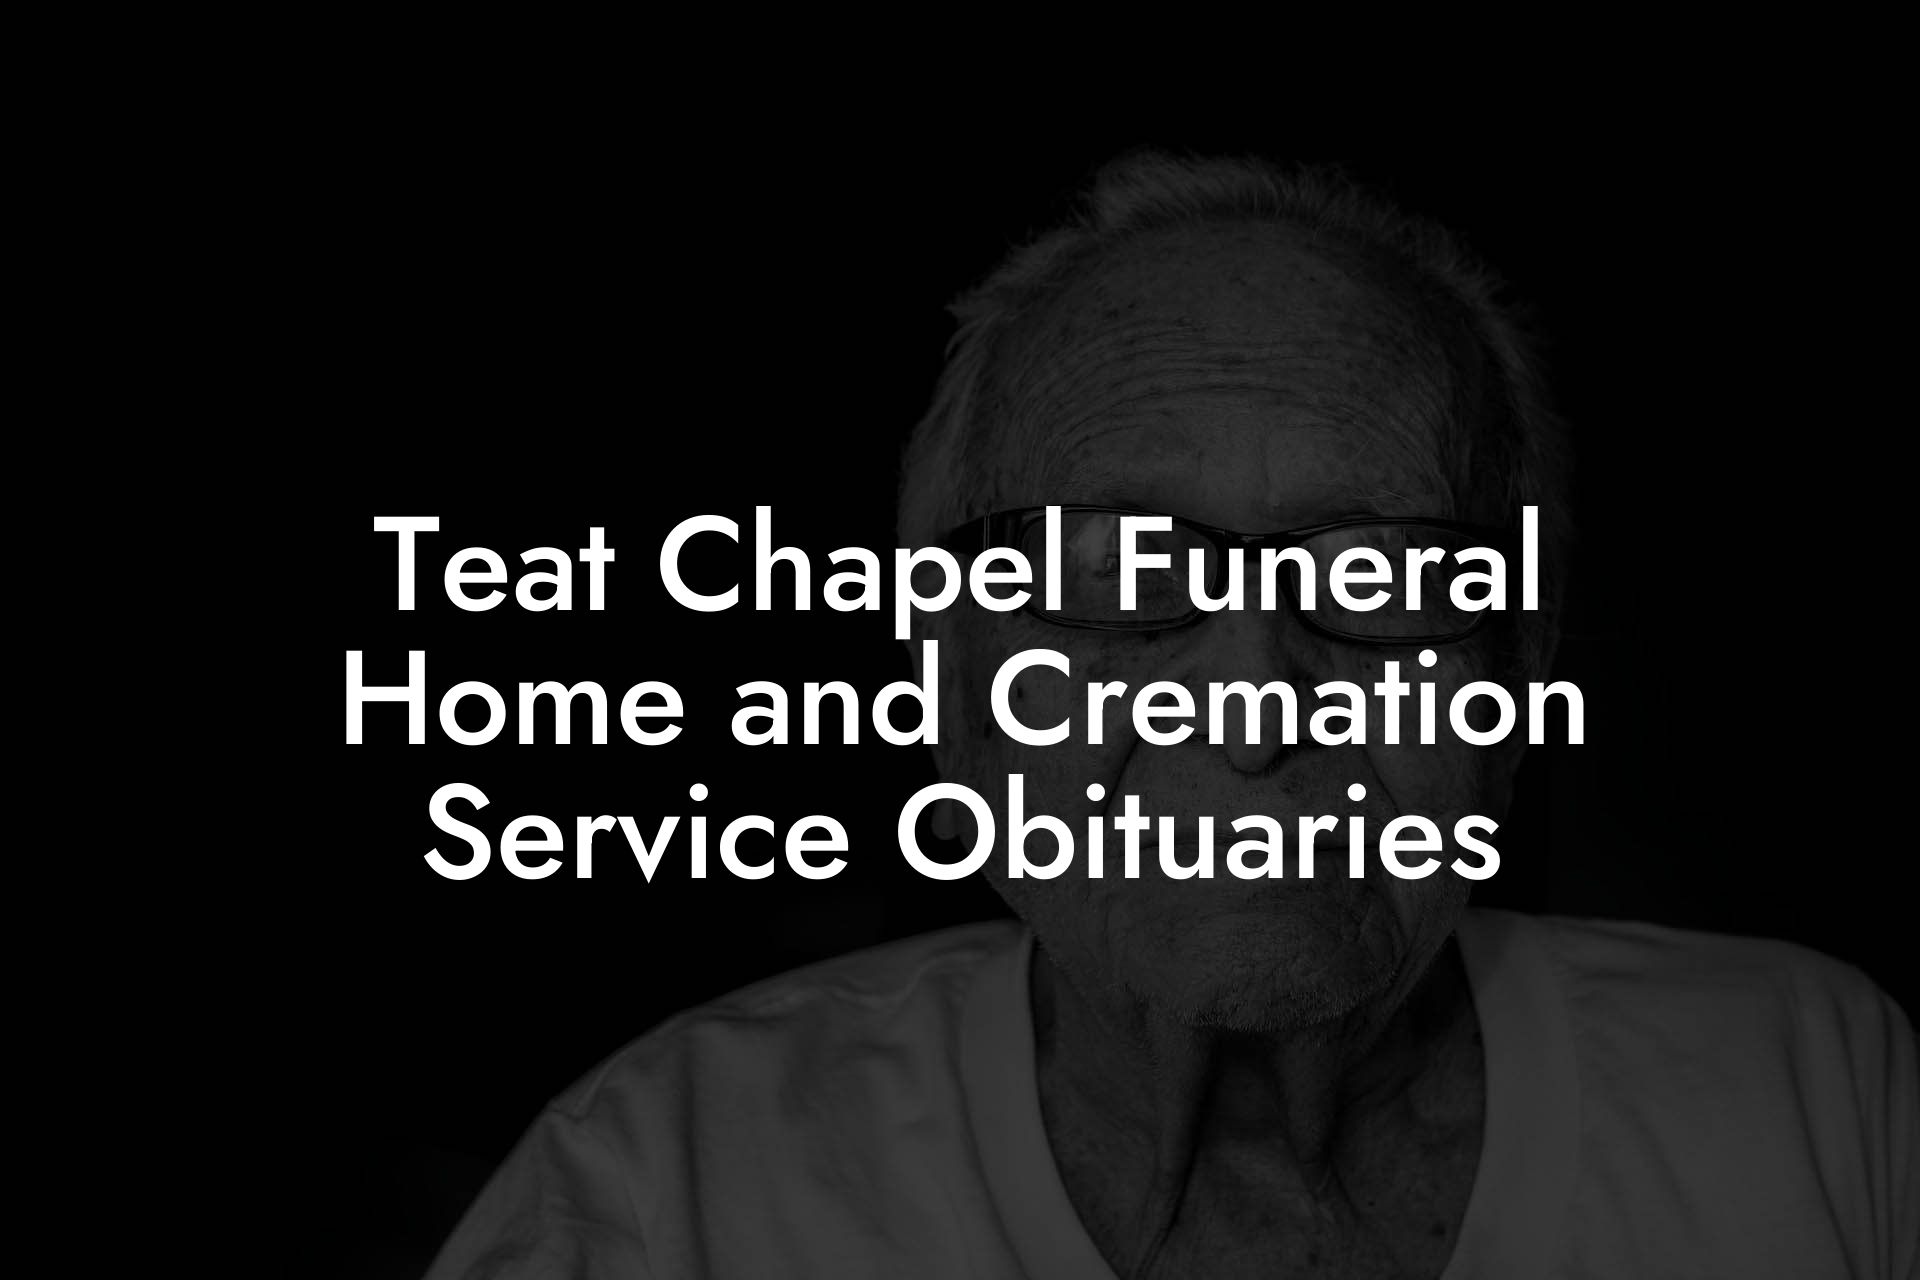 Teat Chapel Funeral Home and Cremation Service Obituaries